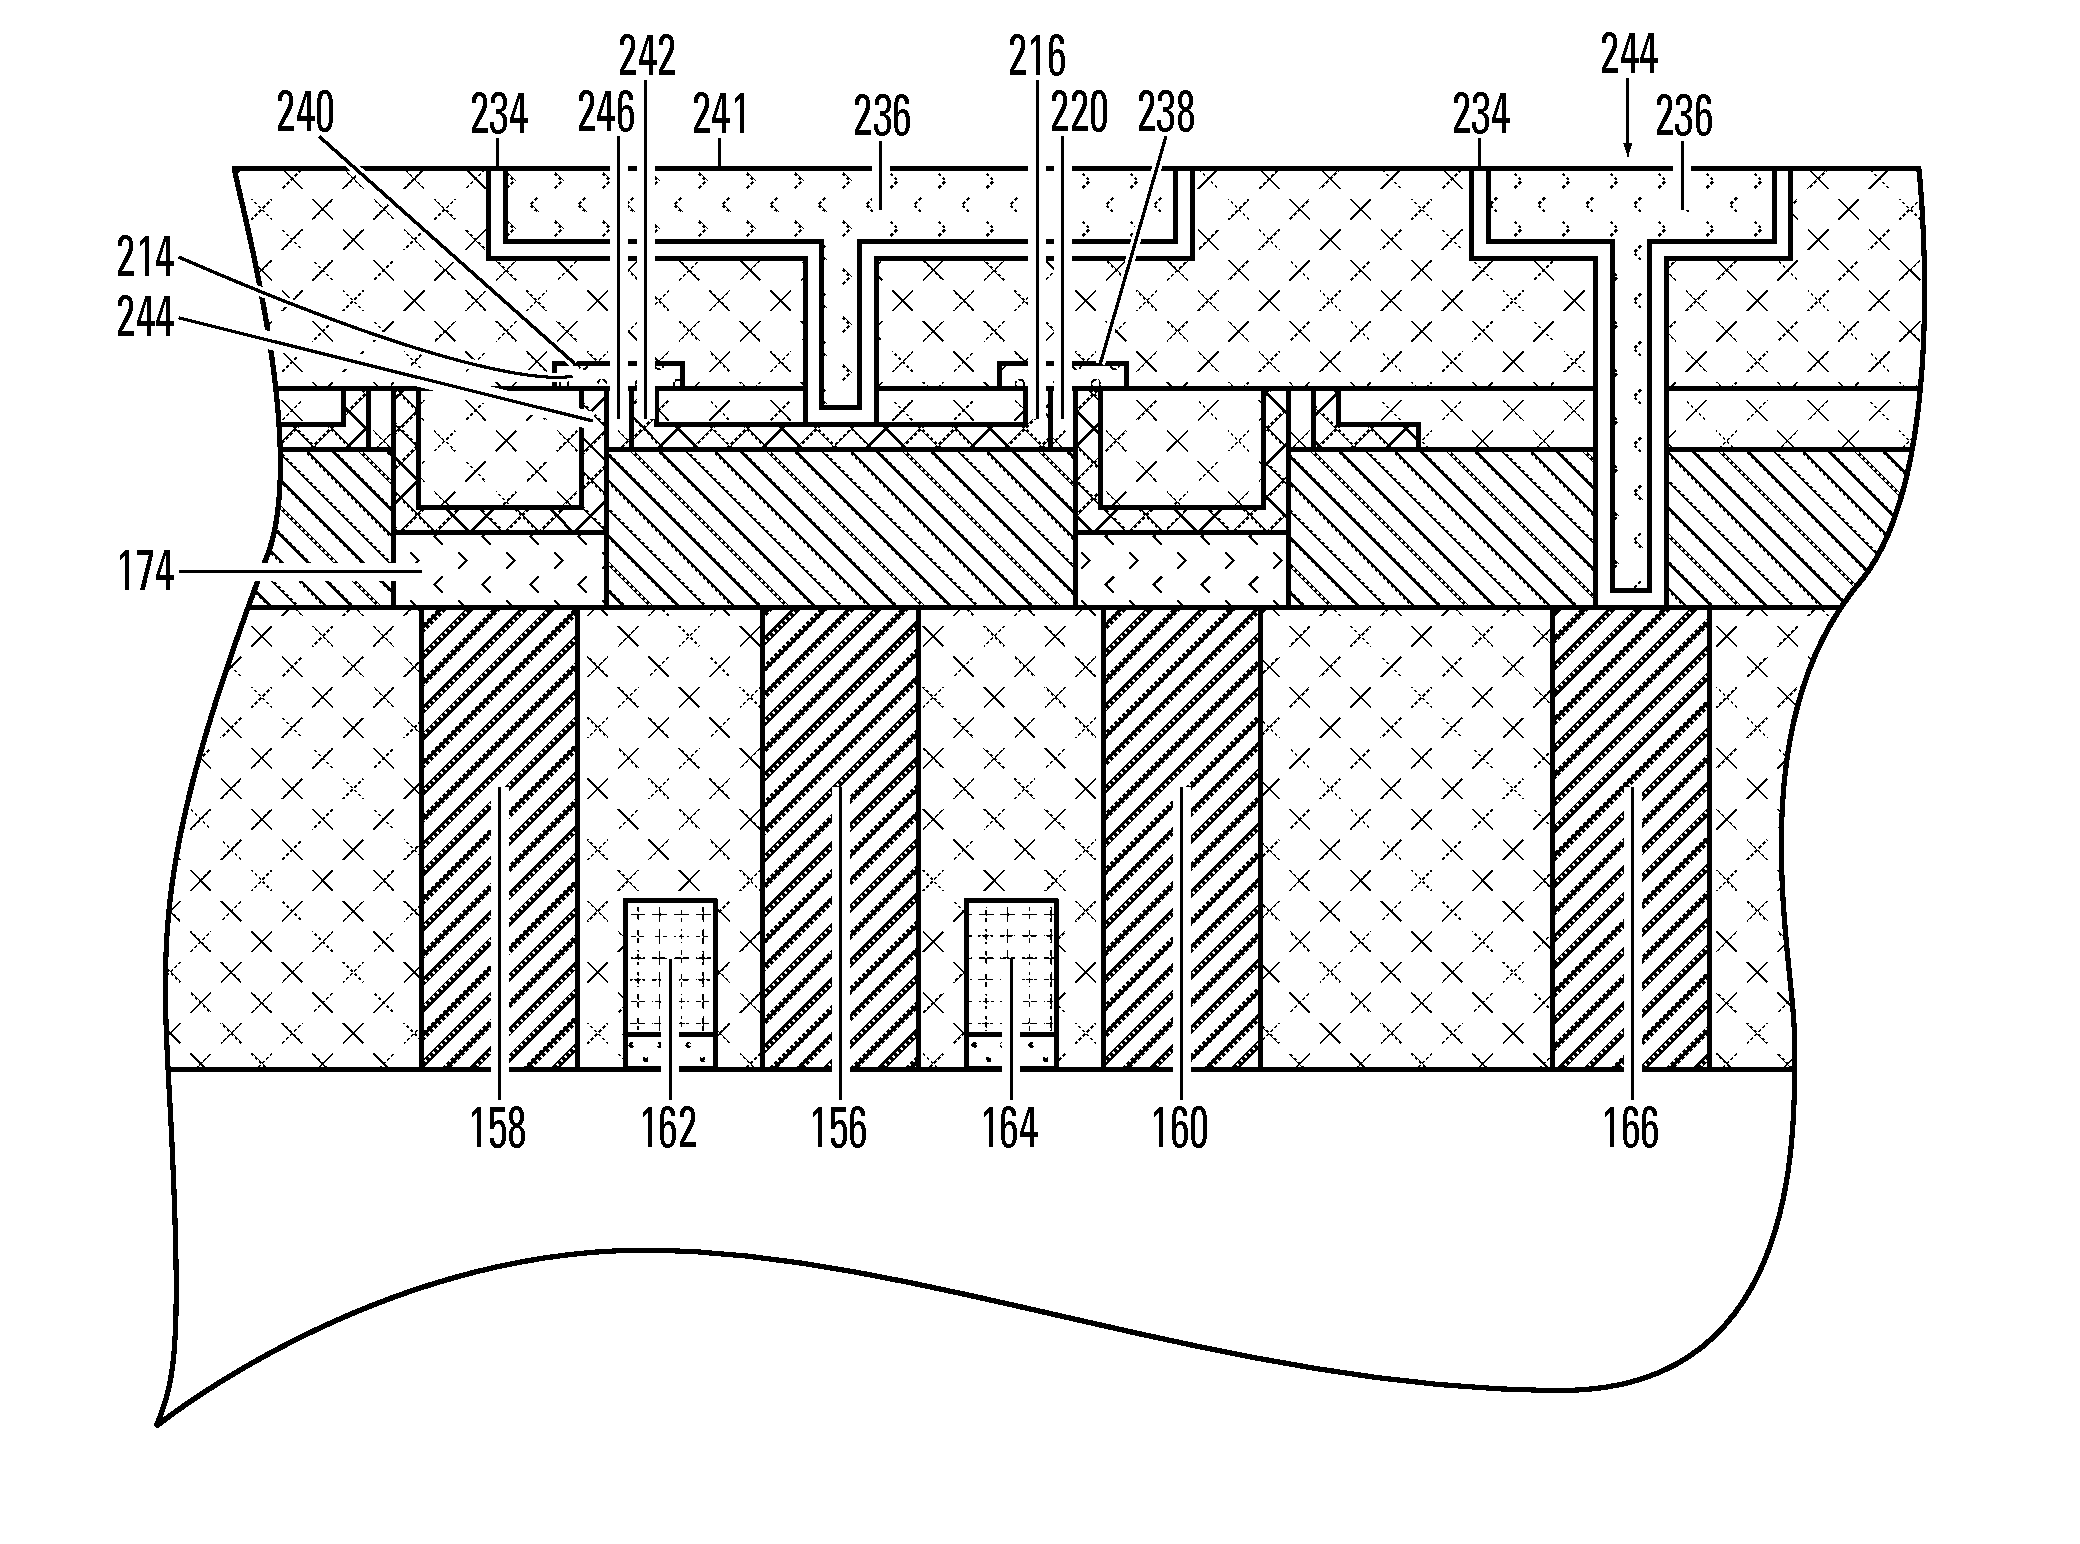 Resistor random access memory cell with reduced active area and reduced contact areas